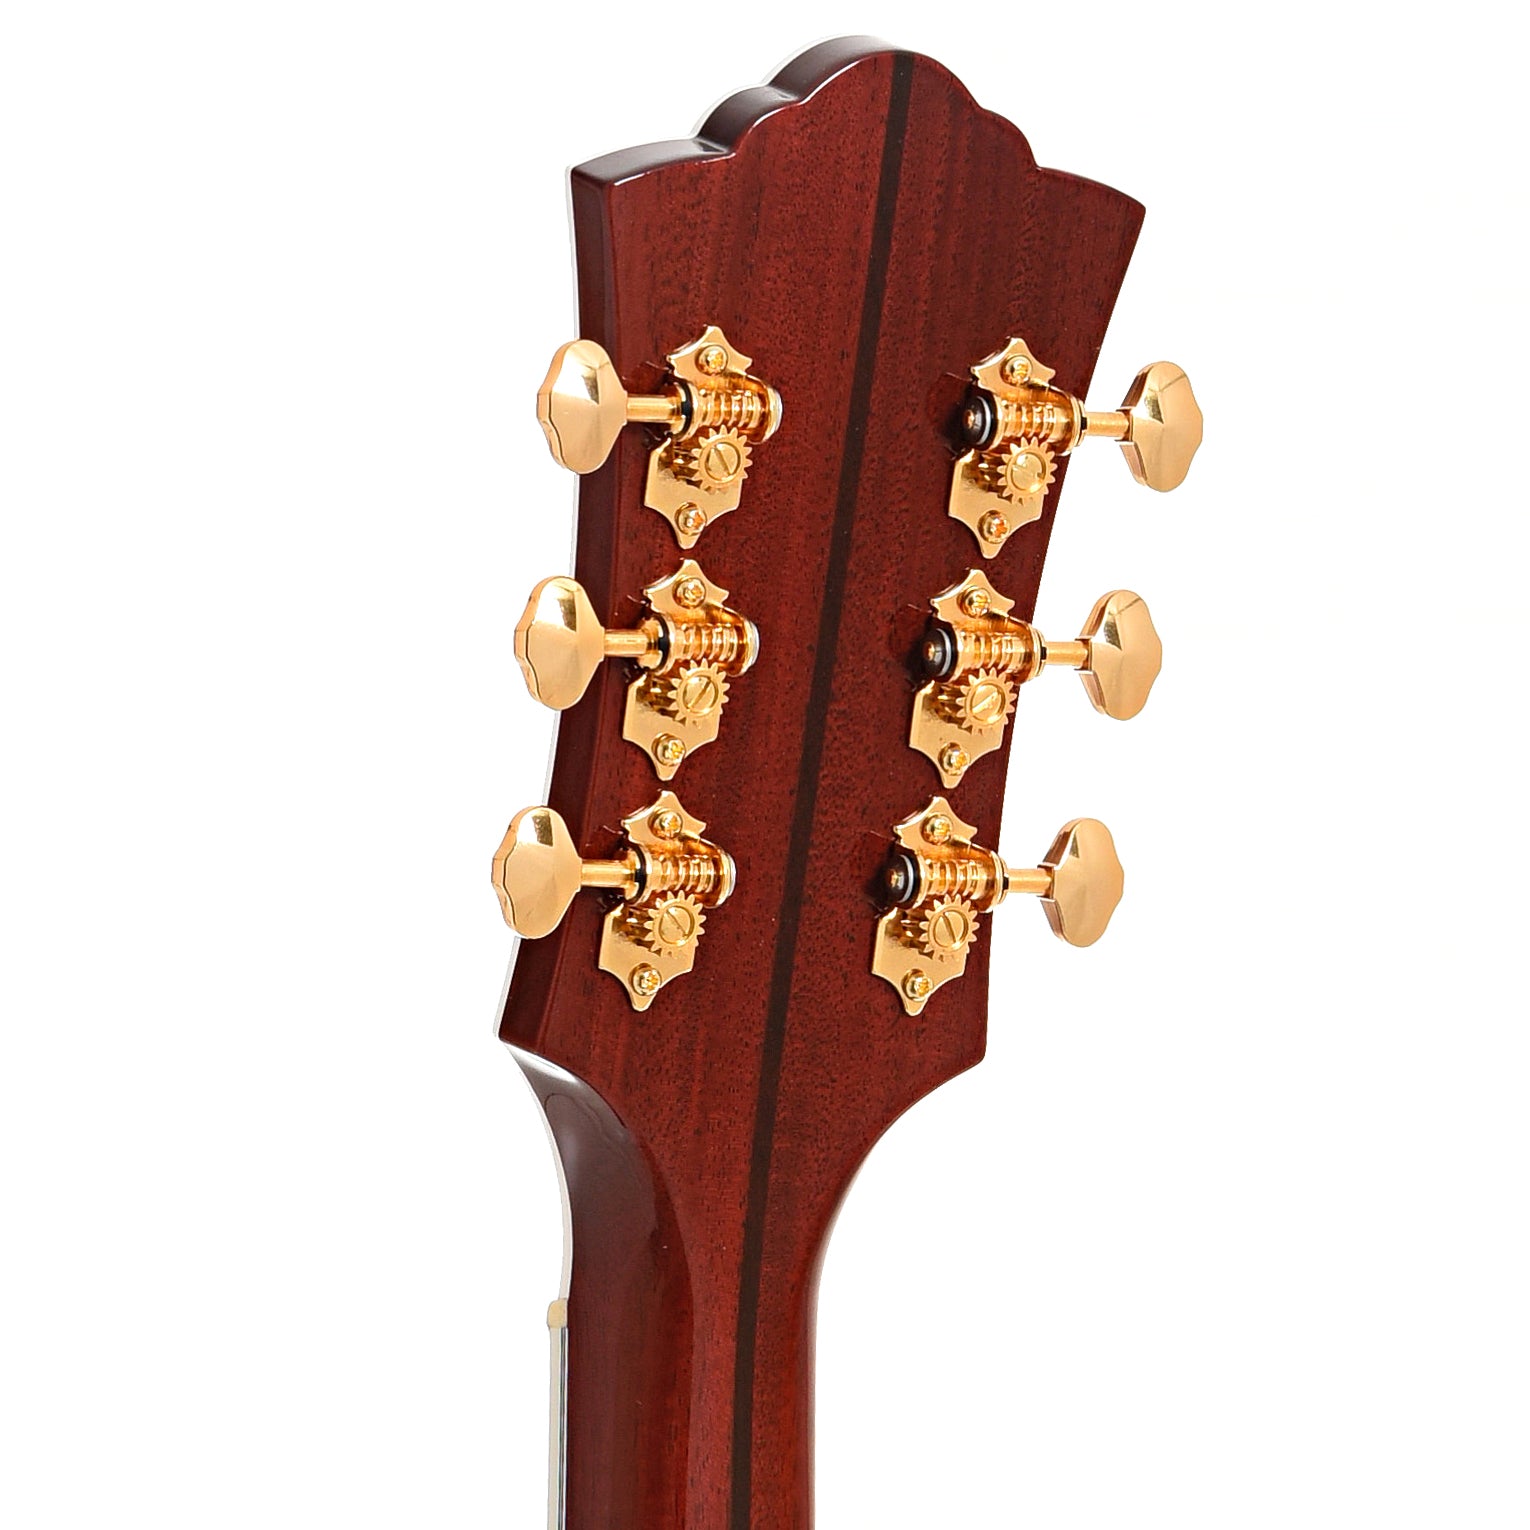 Back headstock of Guild GSR D-55 70th Anniversary Limited Edtition Dreadnought Acoustic 